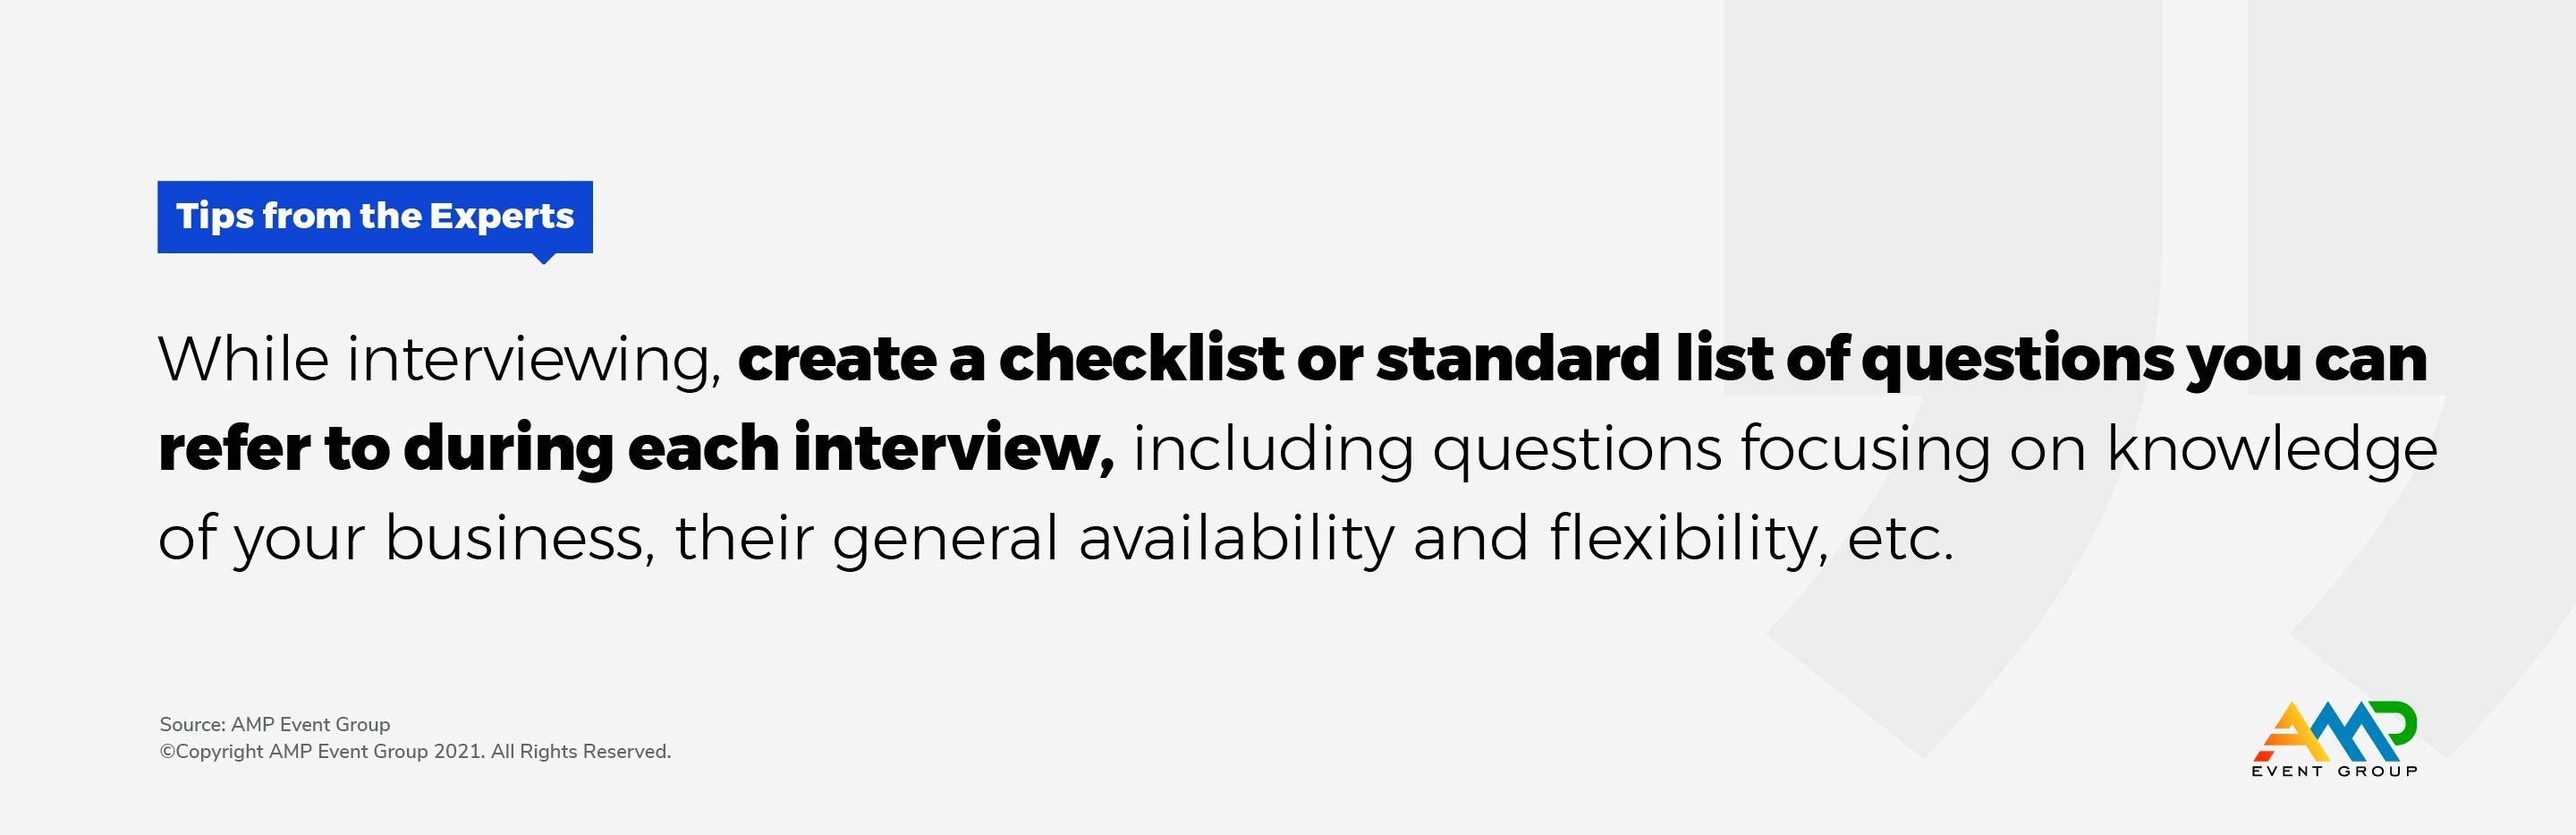 While interviewing, create a checklist or standard list of questions you can refer to during each interview, including questions focusing on knowledge of your business, their general availability and flexibility, etc.